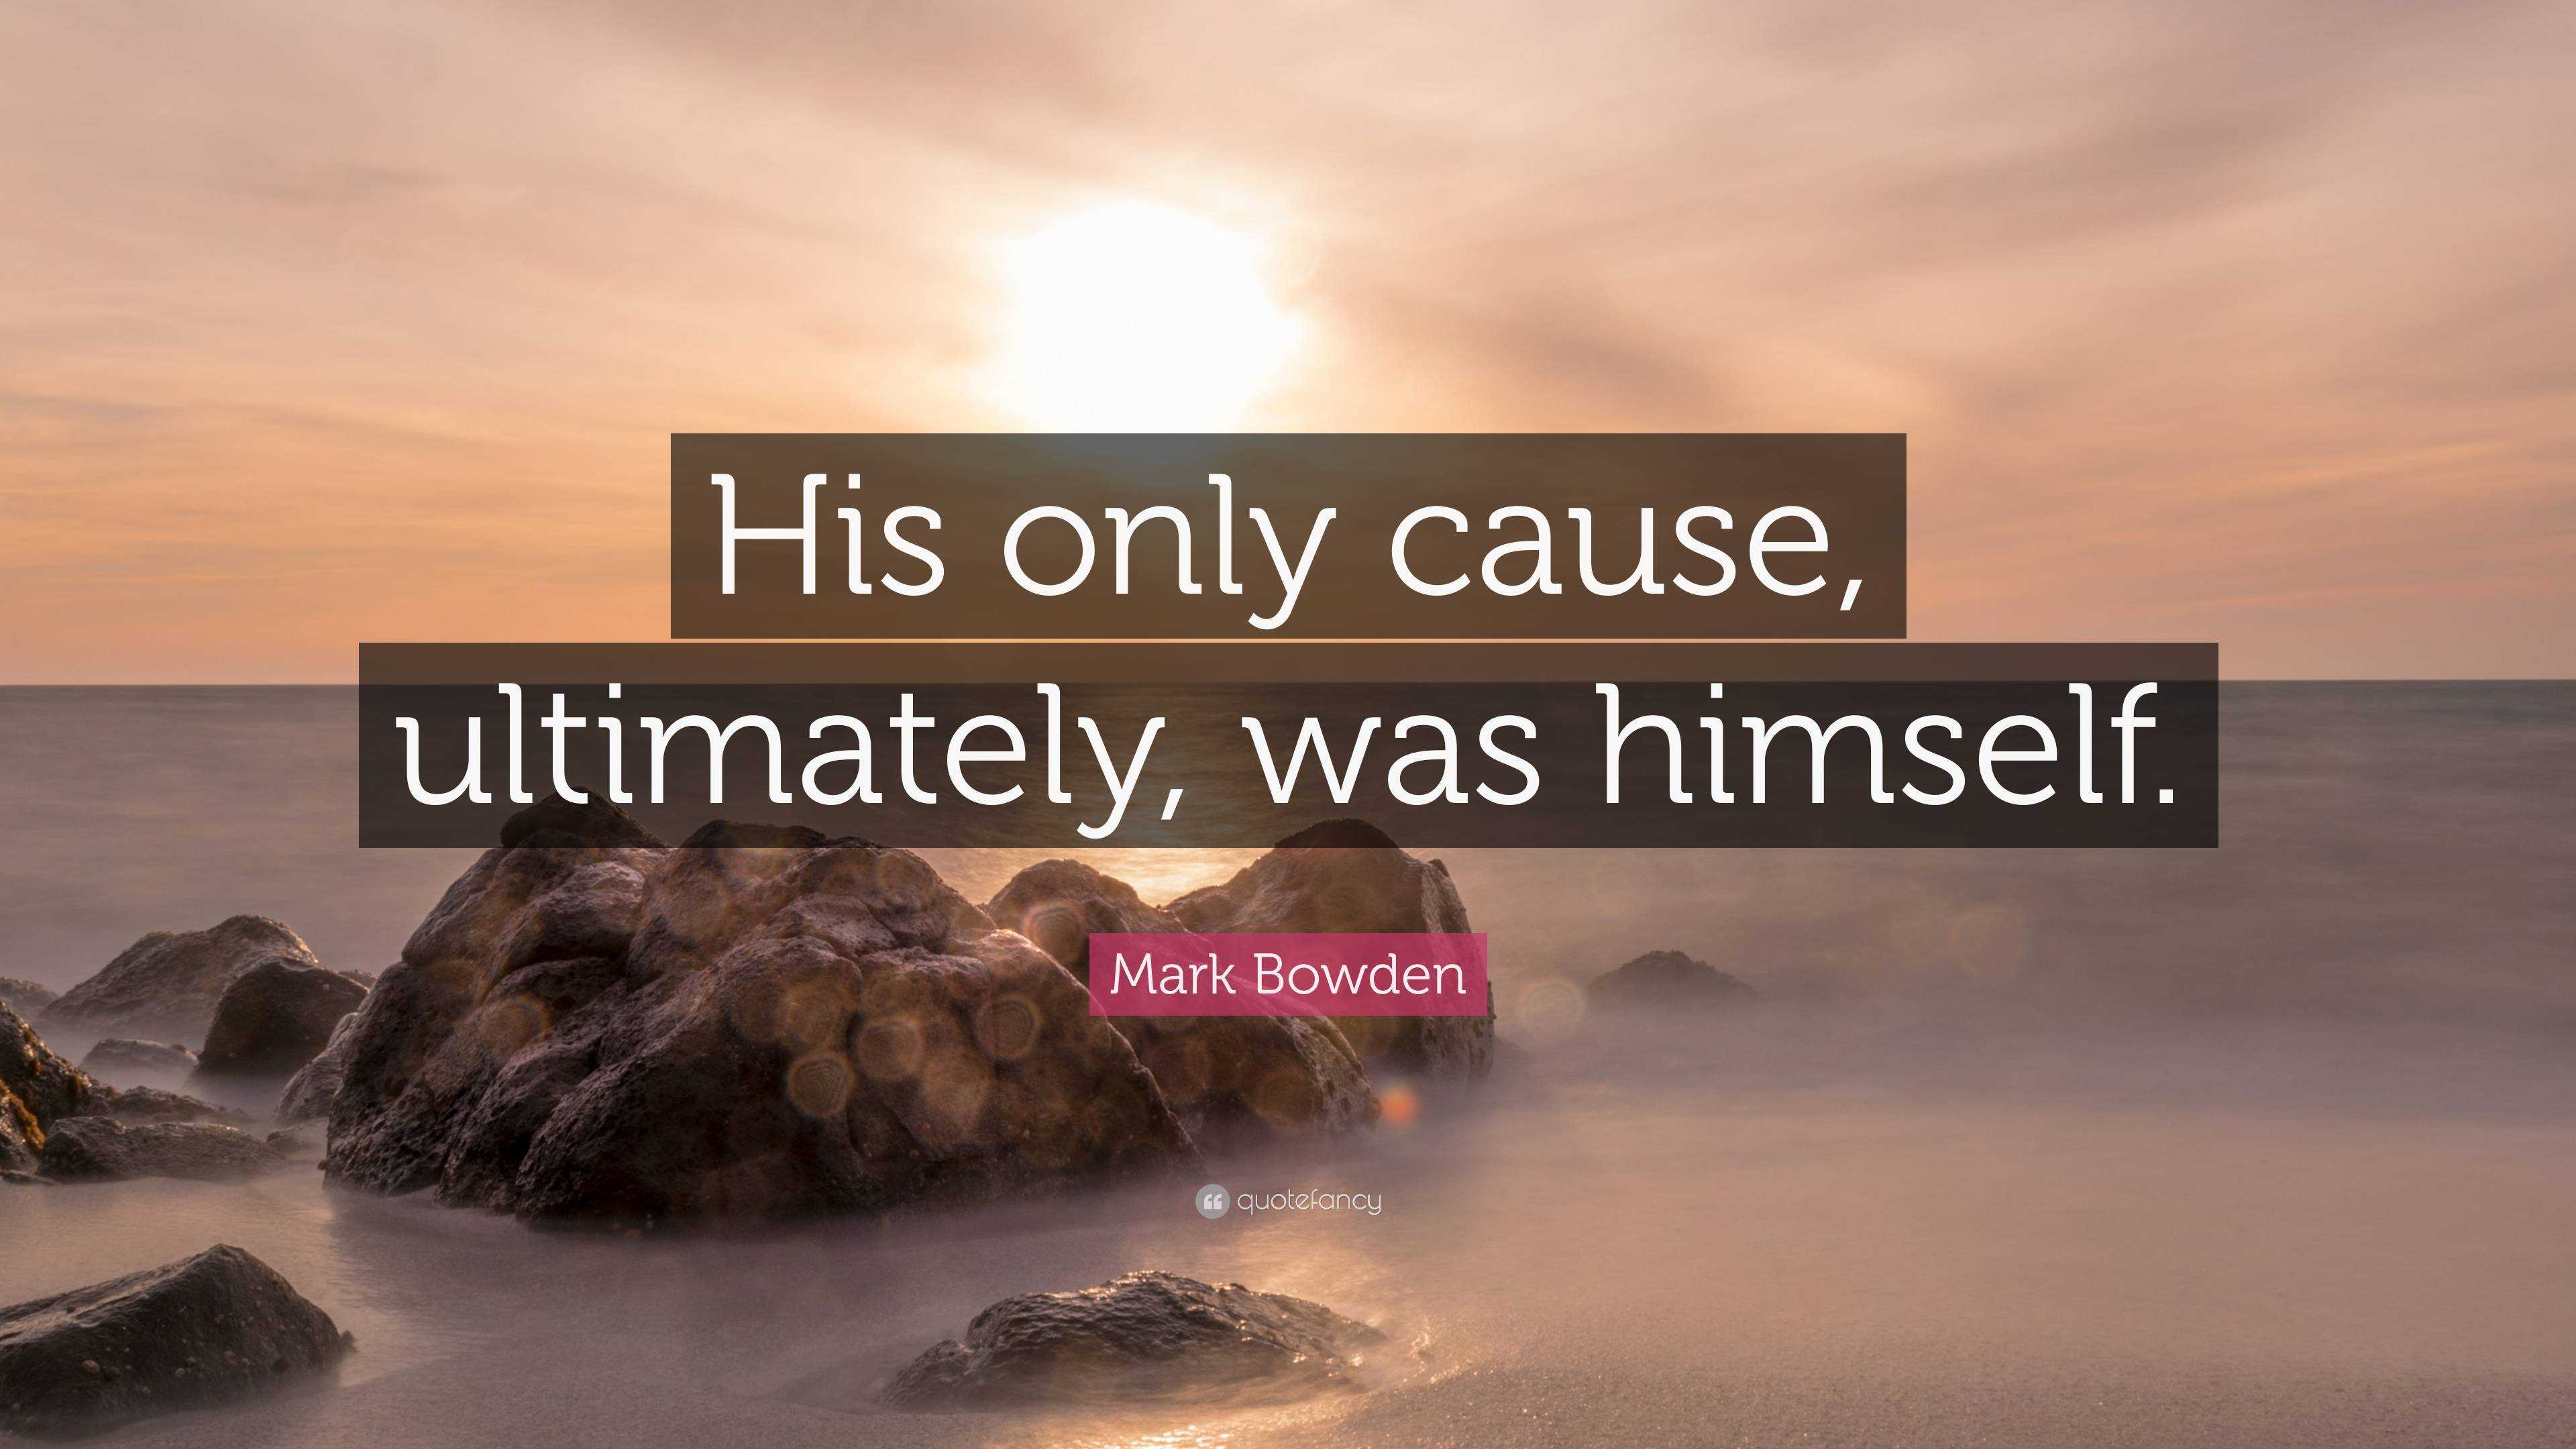 Mark Bowden Quote: “His only cause, ultimately, was himself.”